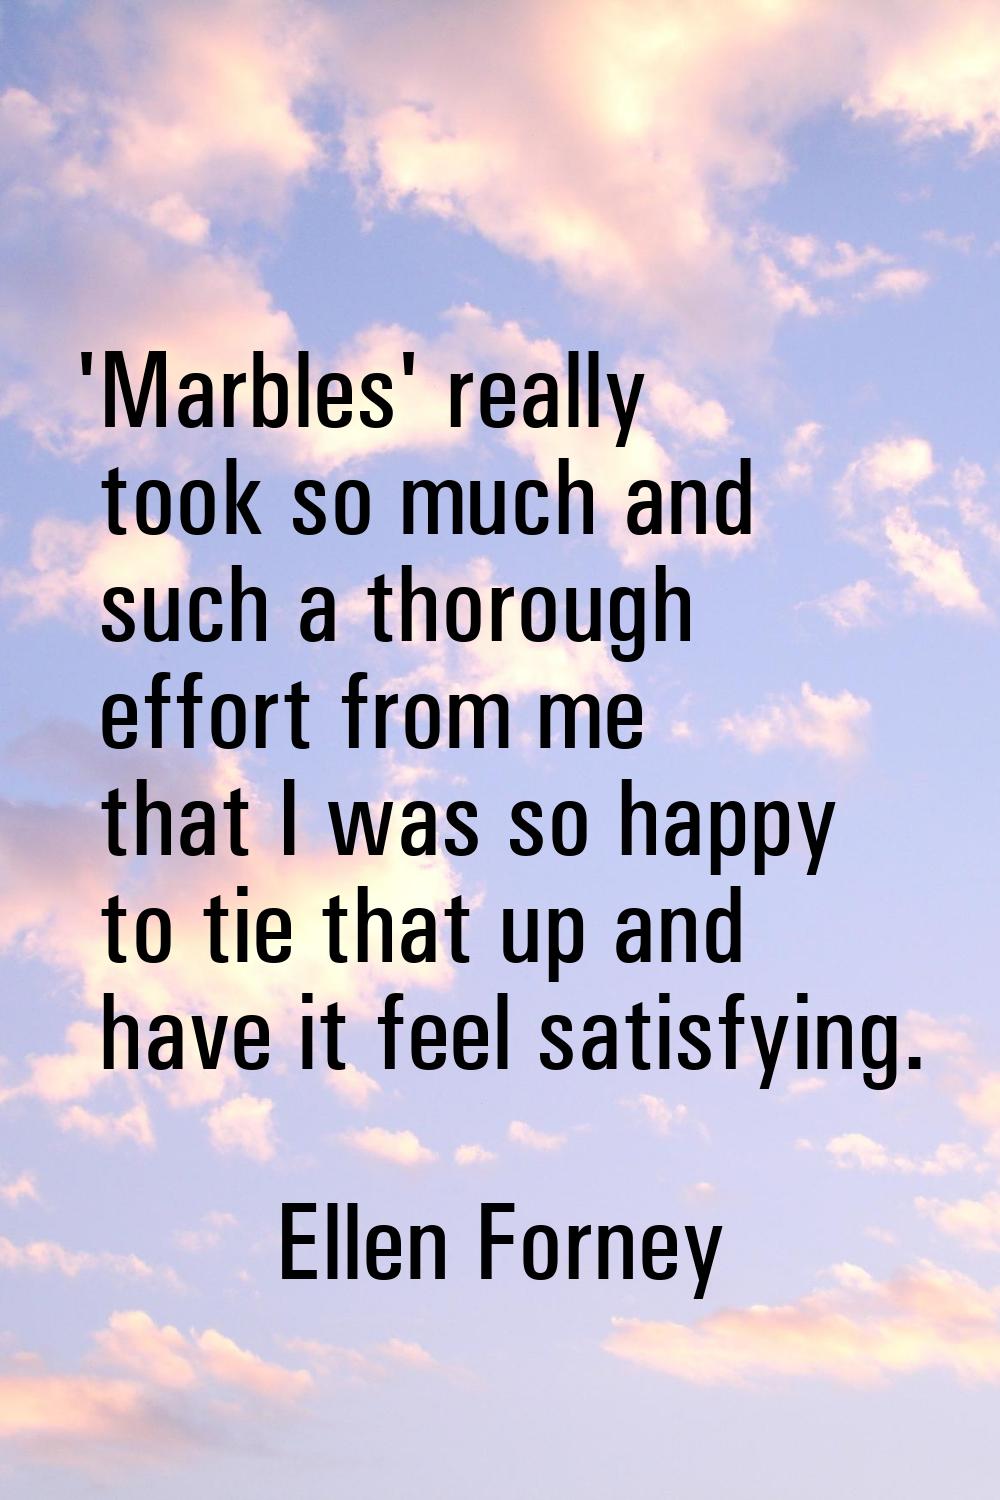 'Marbles' really took so much and such a thorough effort from me that I was so happy to tie that up